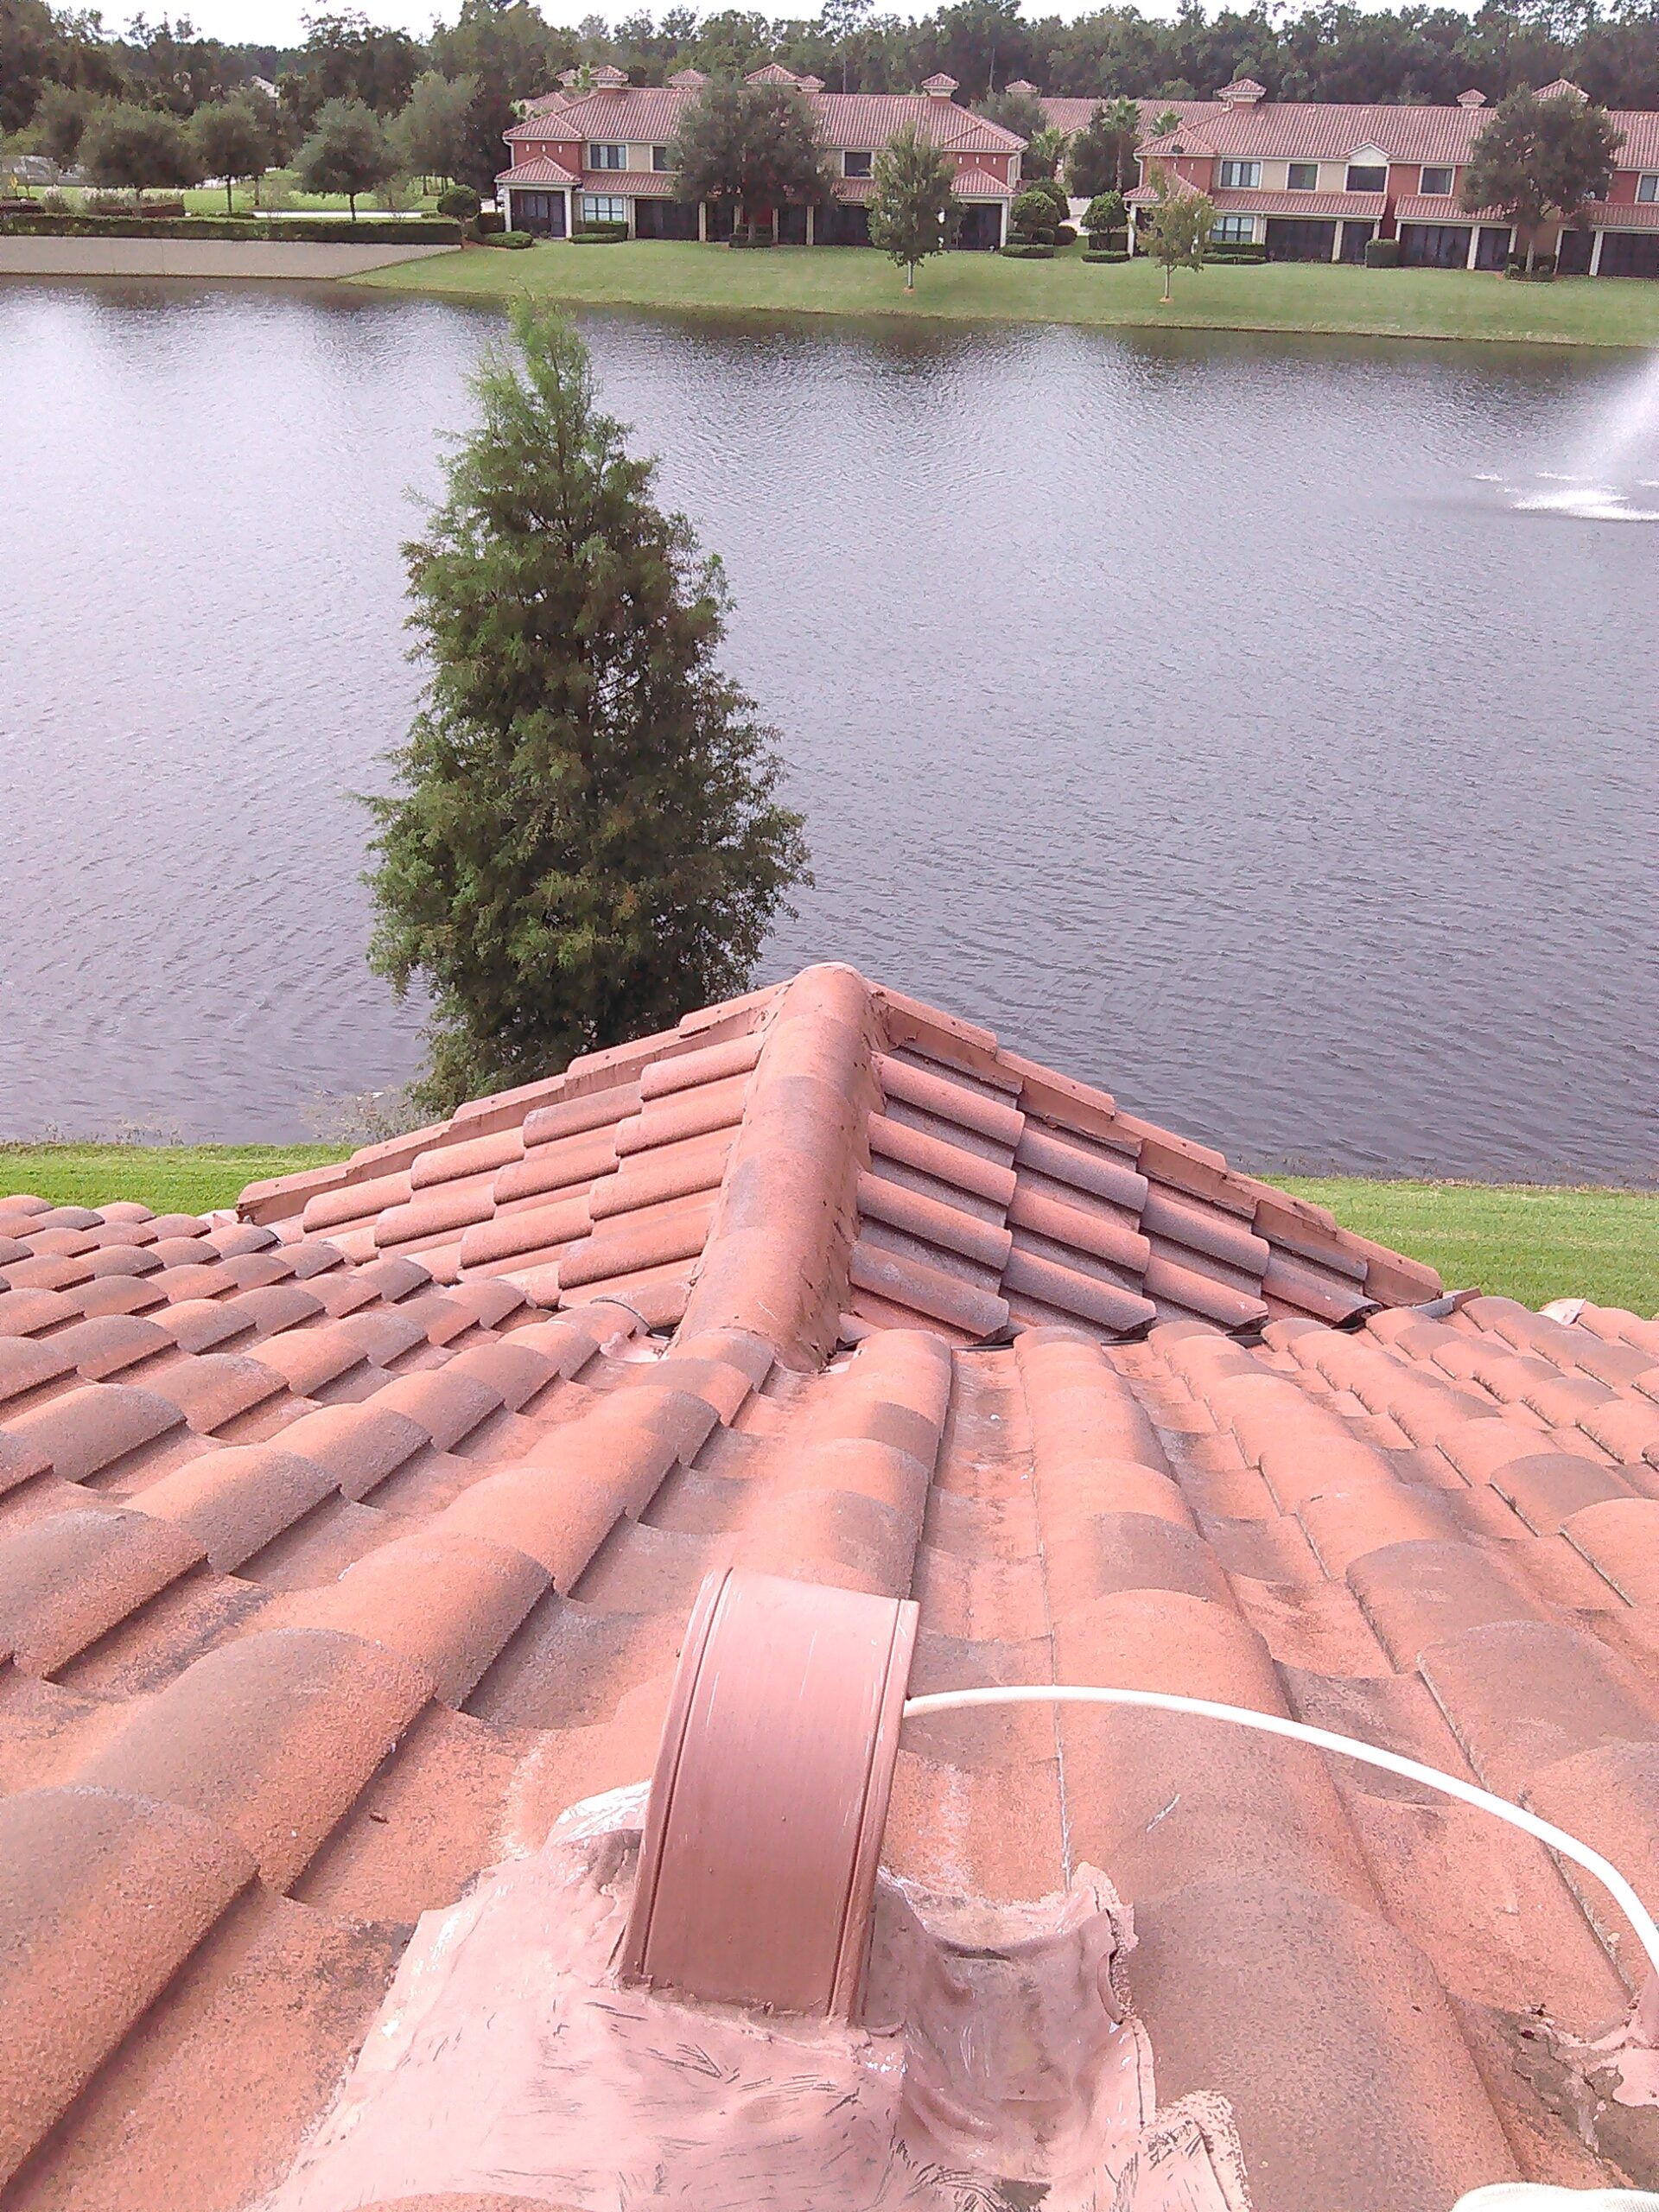 dryer vent cleaning near me Jax.`St. augustine